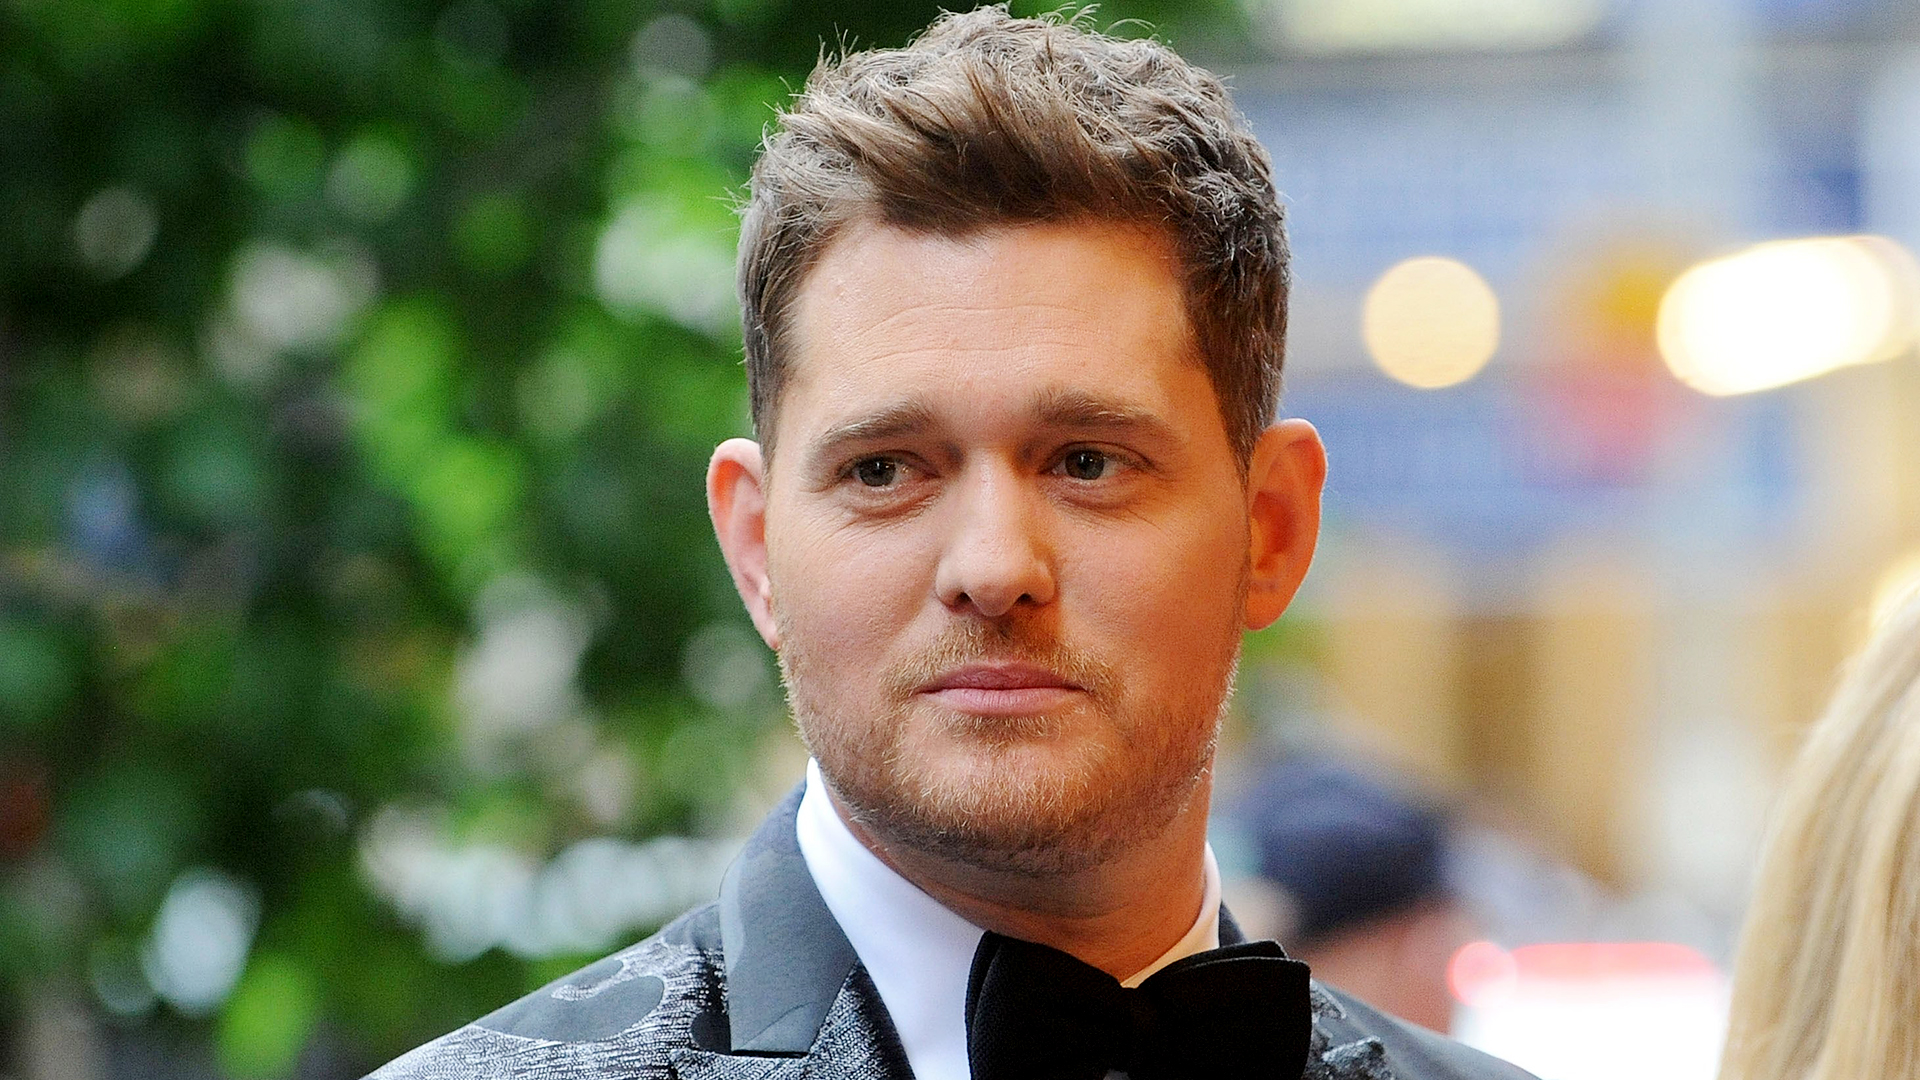 Michael Buble Car Collection Net Worth, Salary, Age & Wife